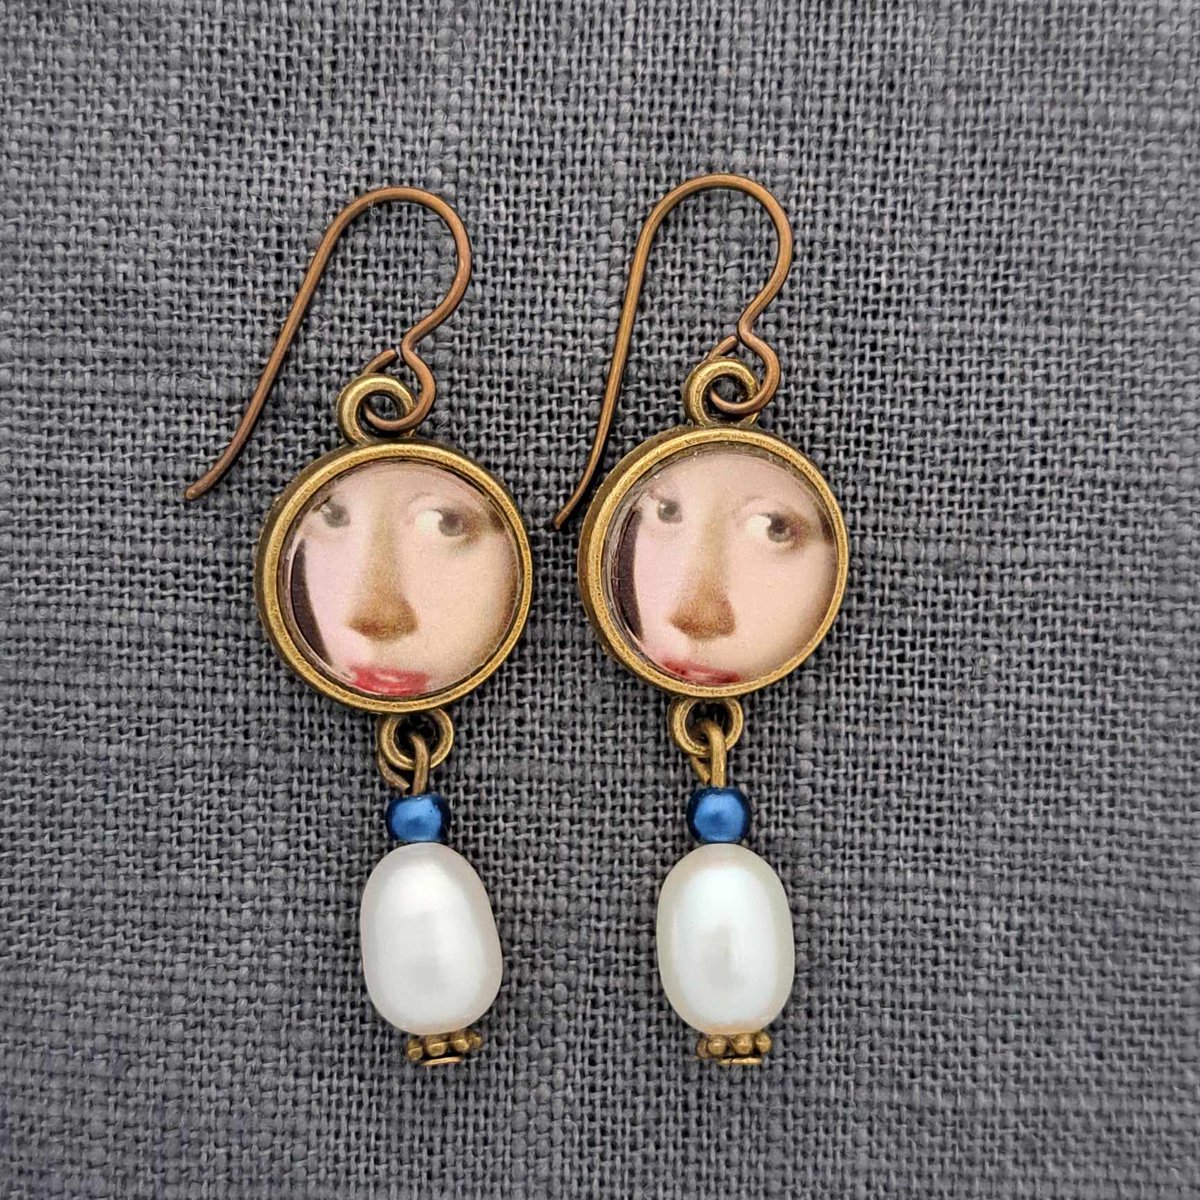 #HandmadeHour #handmade 
#UkCraftersHour #smallbiz 

Happy Easter! New to my #etsyshop Girl with a pearl earring earrings!

Check them out on my store 
etsy.com/uk/shop/ForThe…

#Vermeer #girlwithapearl #history 
#Dutchhistory #historicjewellery 
#freshwaterpearls #antiquebronze